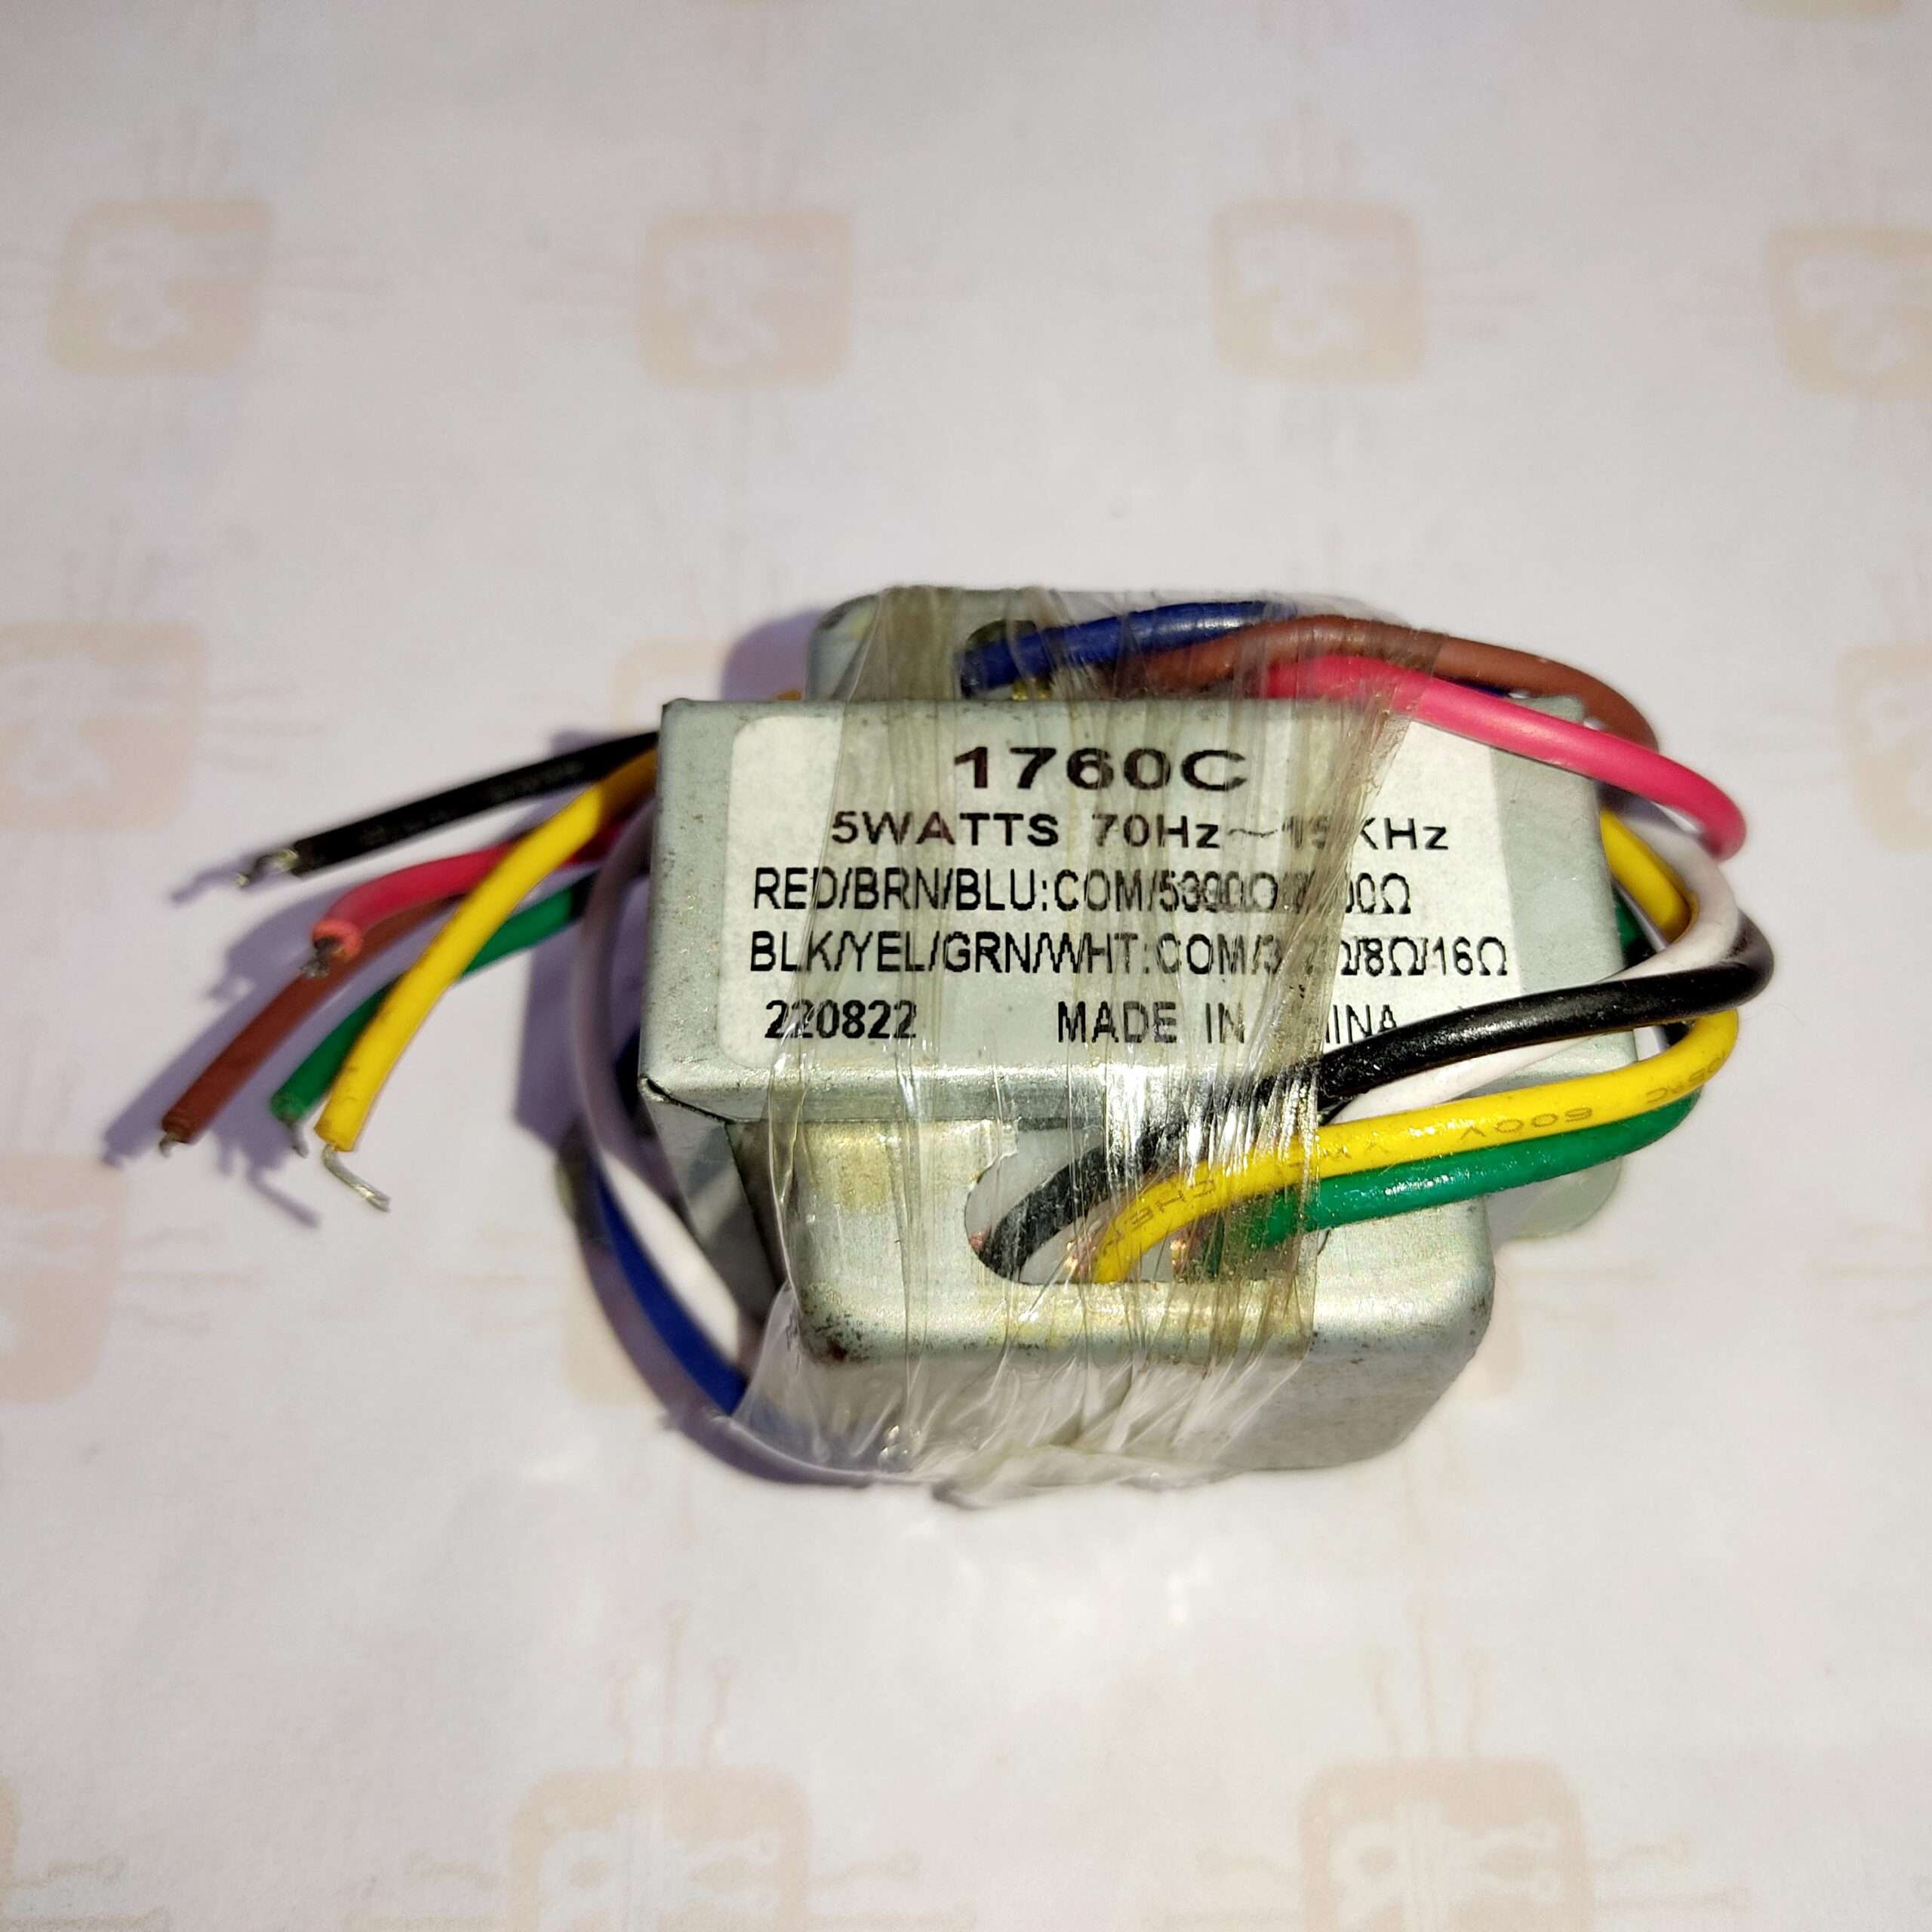 Fender Champ 5W Transformer drop in replacements.